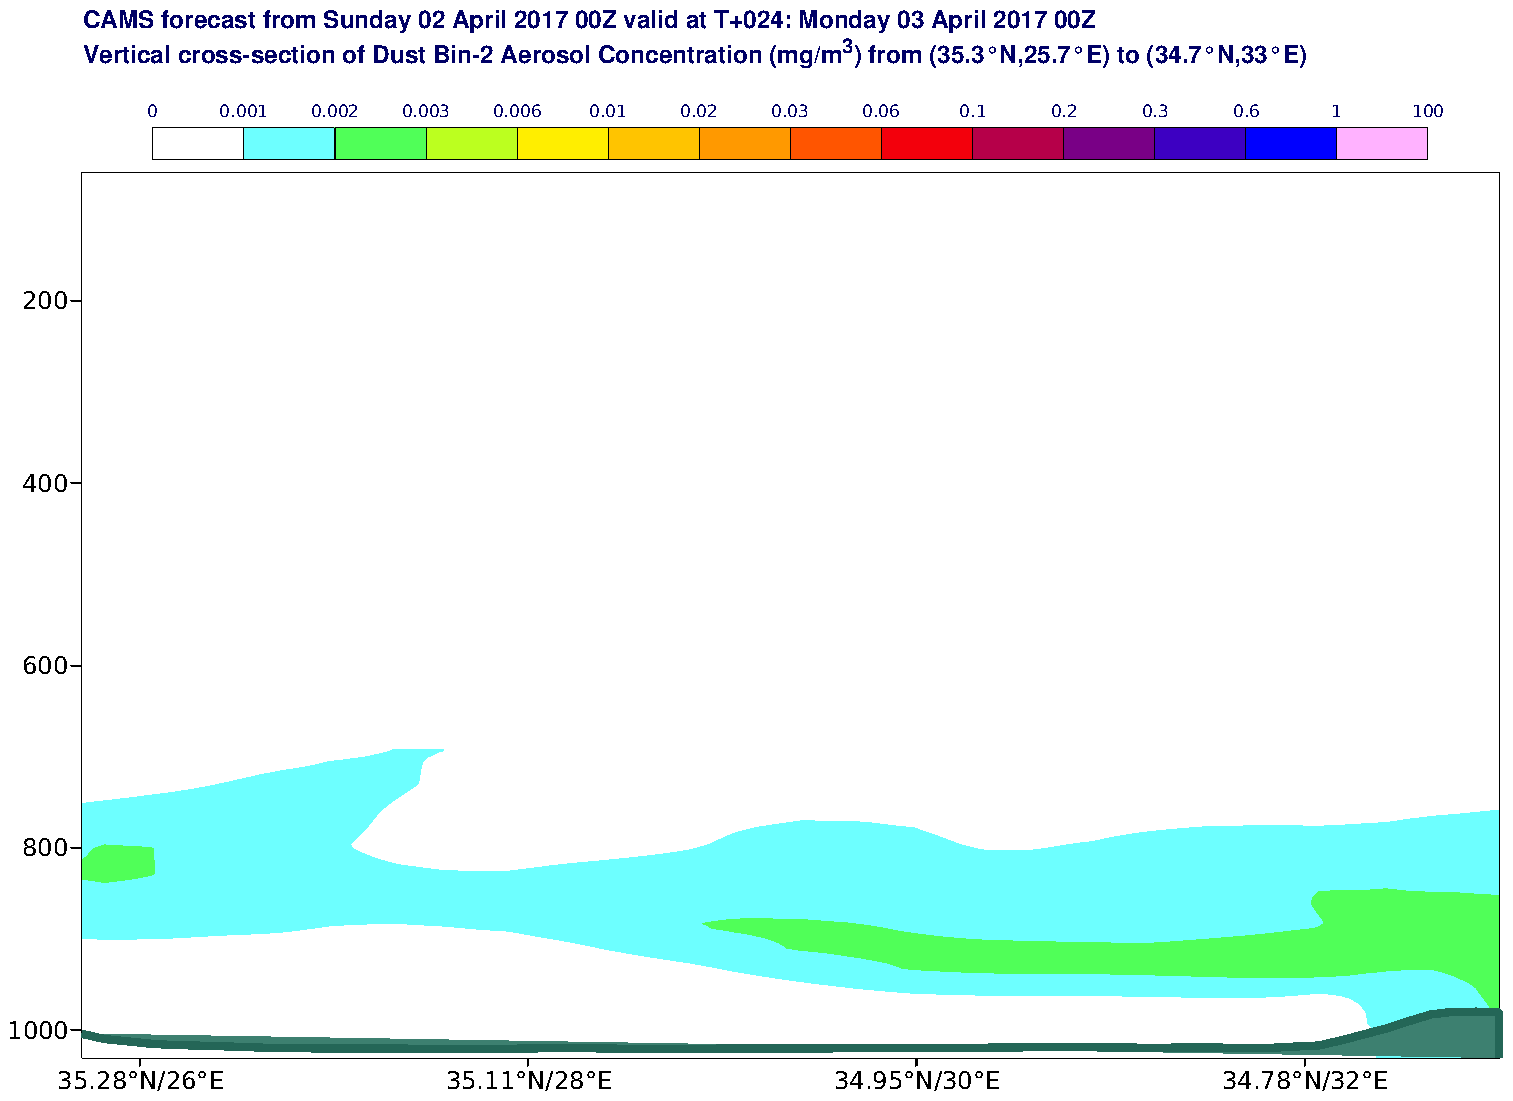 Vertical cross-section of Dust Bin-2 Aerosol Concentration (mg/m3) valid at T24 - 2017-04-03 00:00